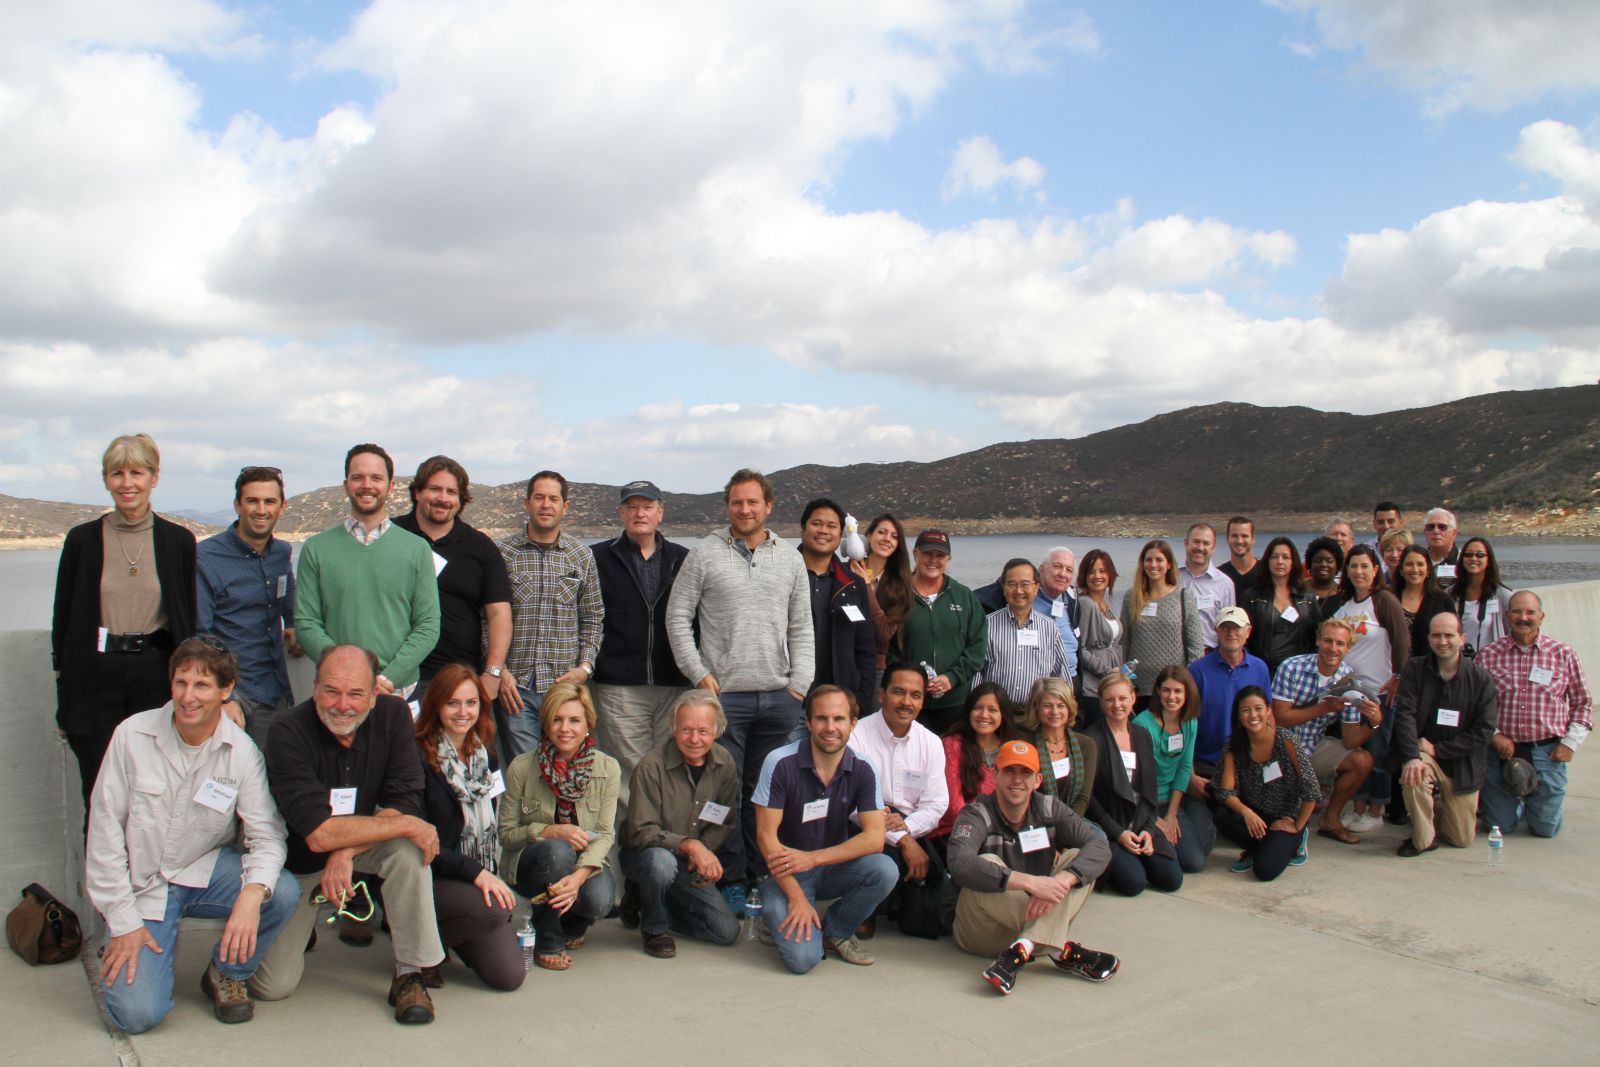 Fall 2014 Citizens Water Academy participants